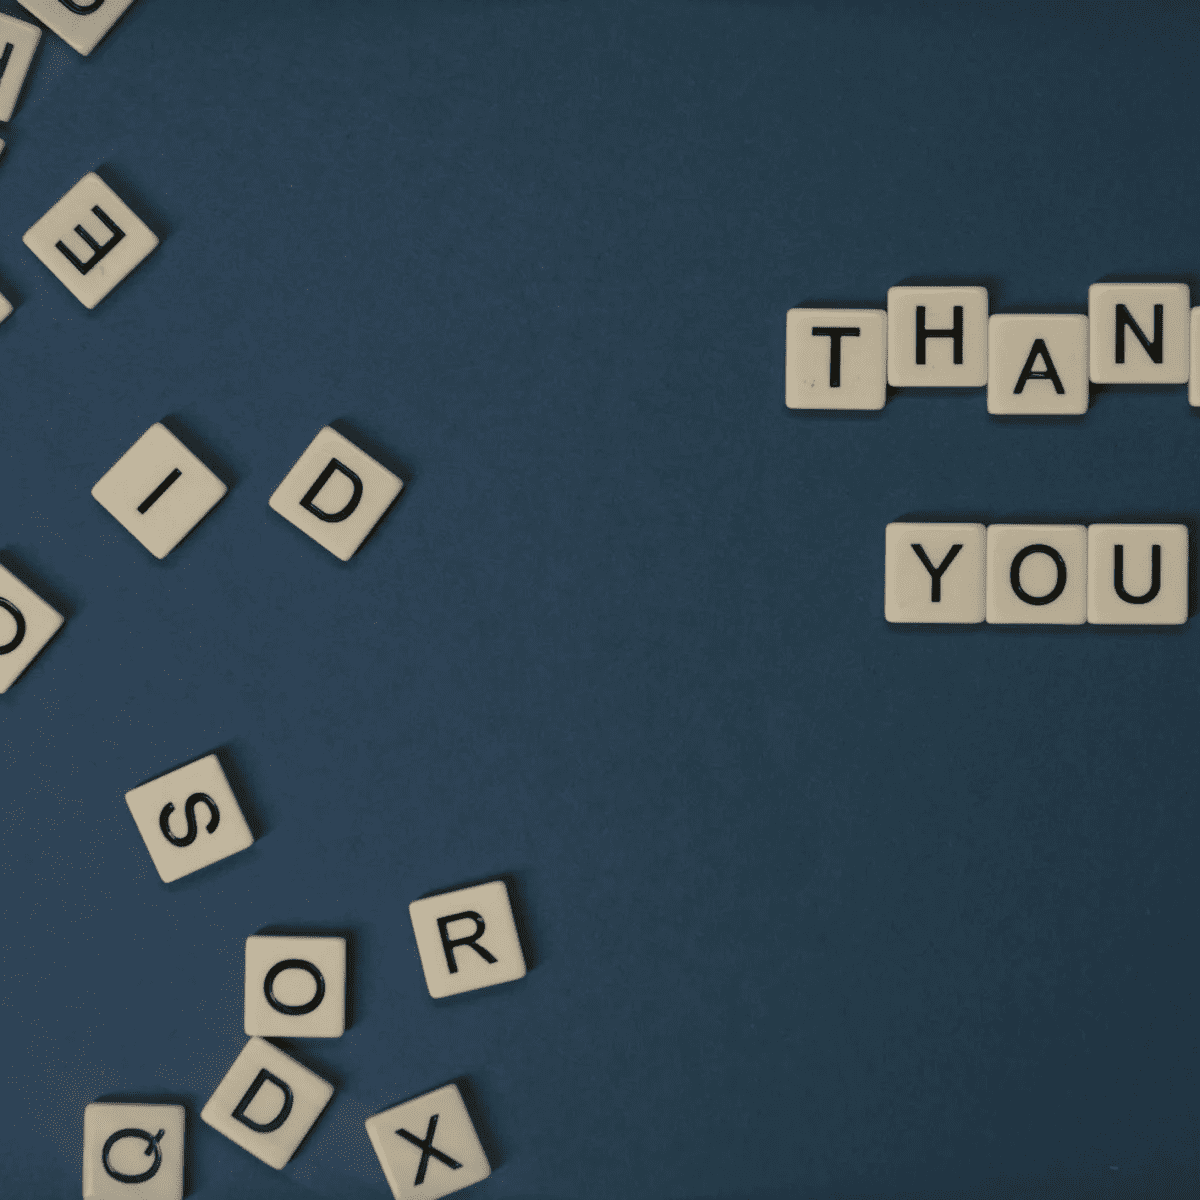 The Thank You Song 